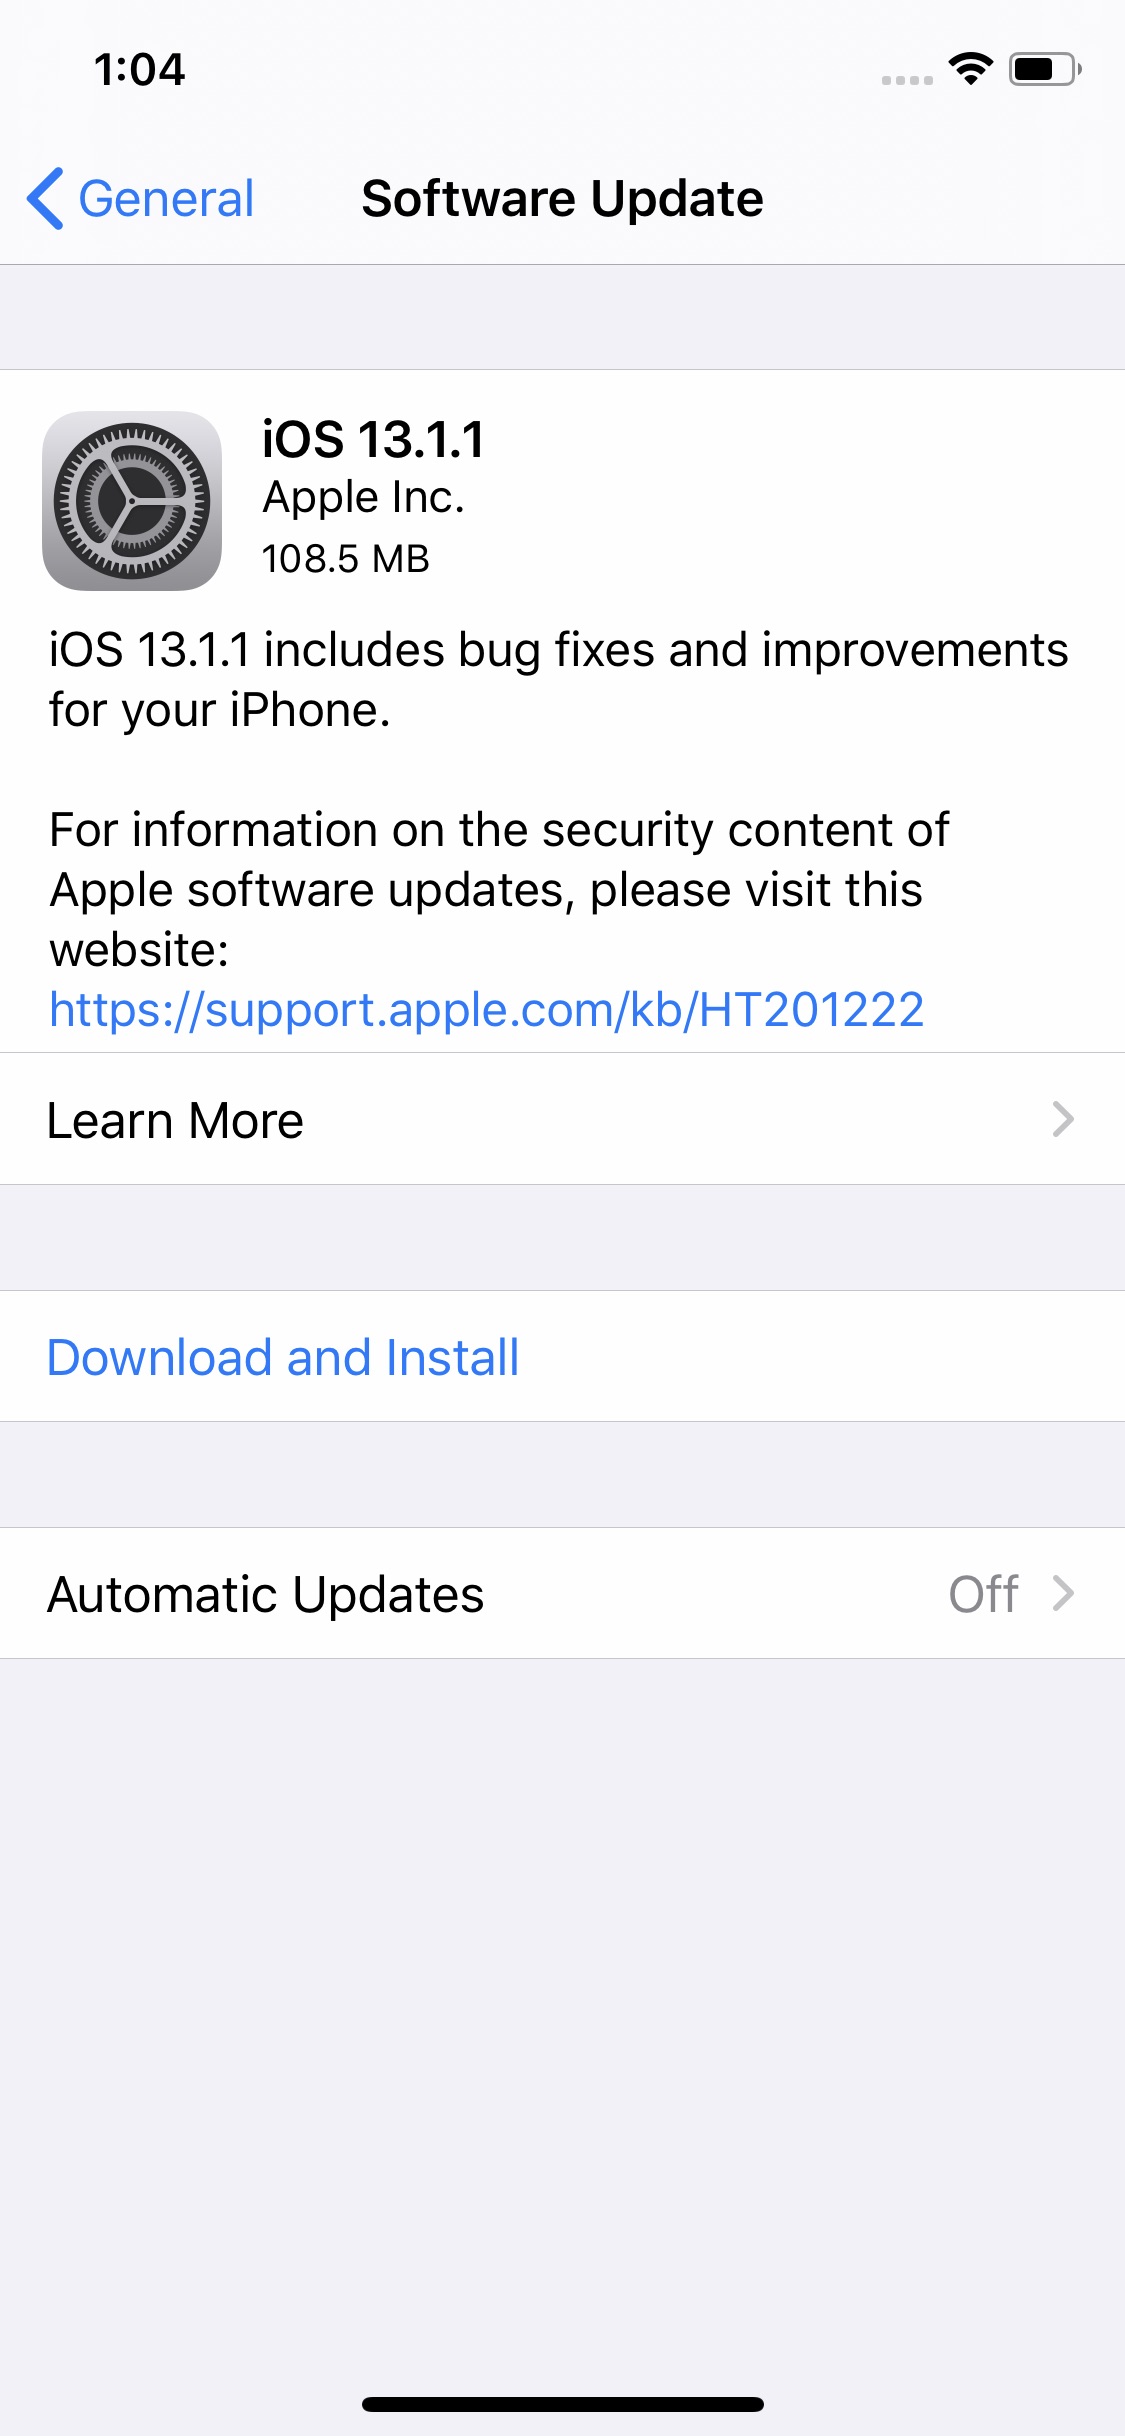 Apple Releases iOS 13.1.1 to Fix Issues With Battery Life, Restore From Backup, More [Download]